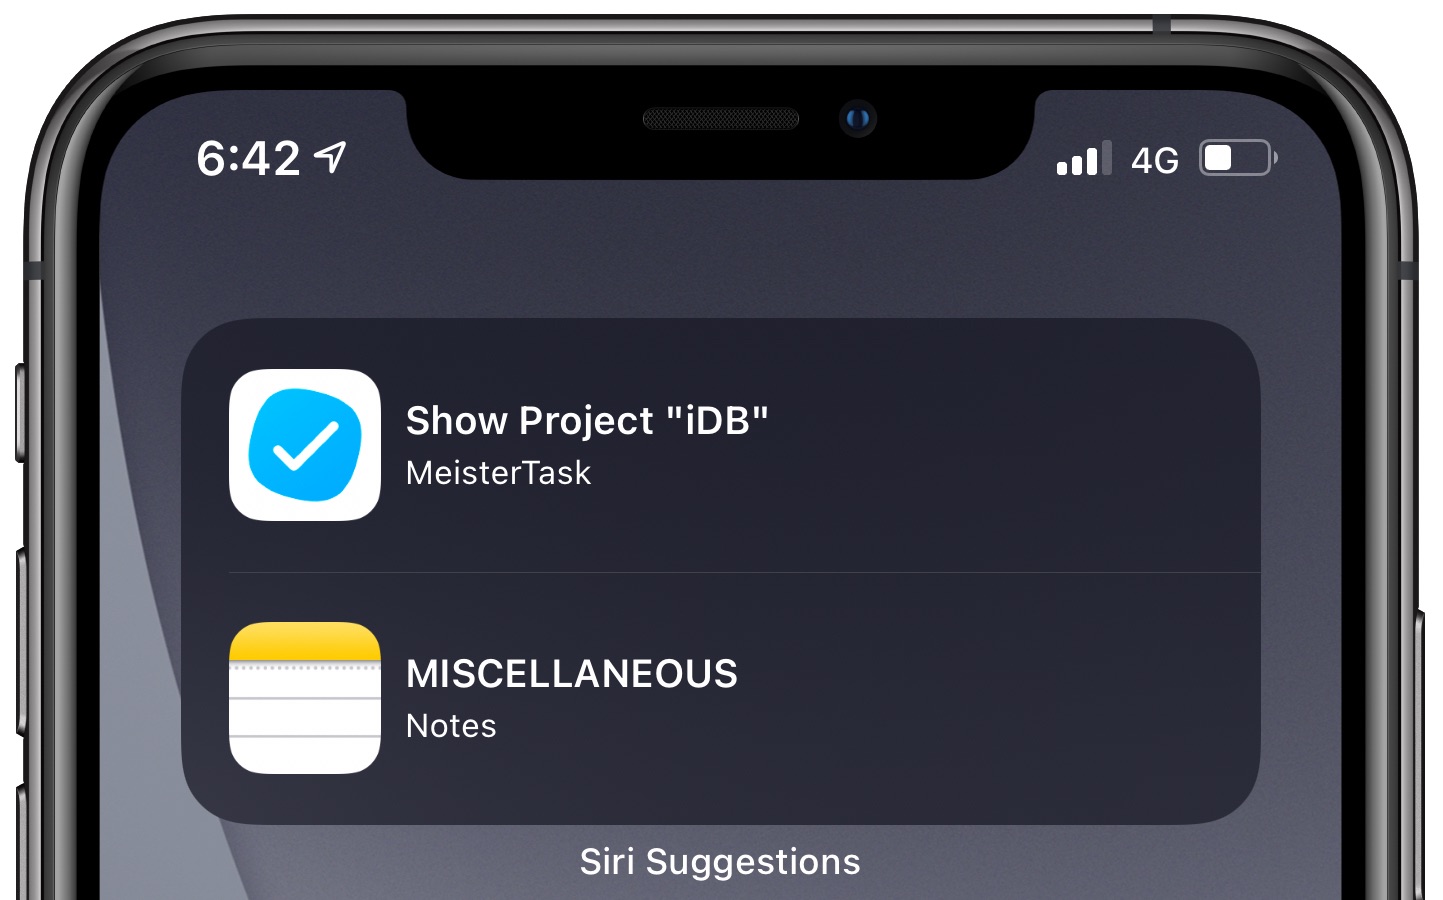 Siri Suggestions widget - an example of suggested shortcuts on the iPhone home screen